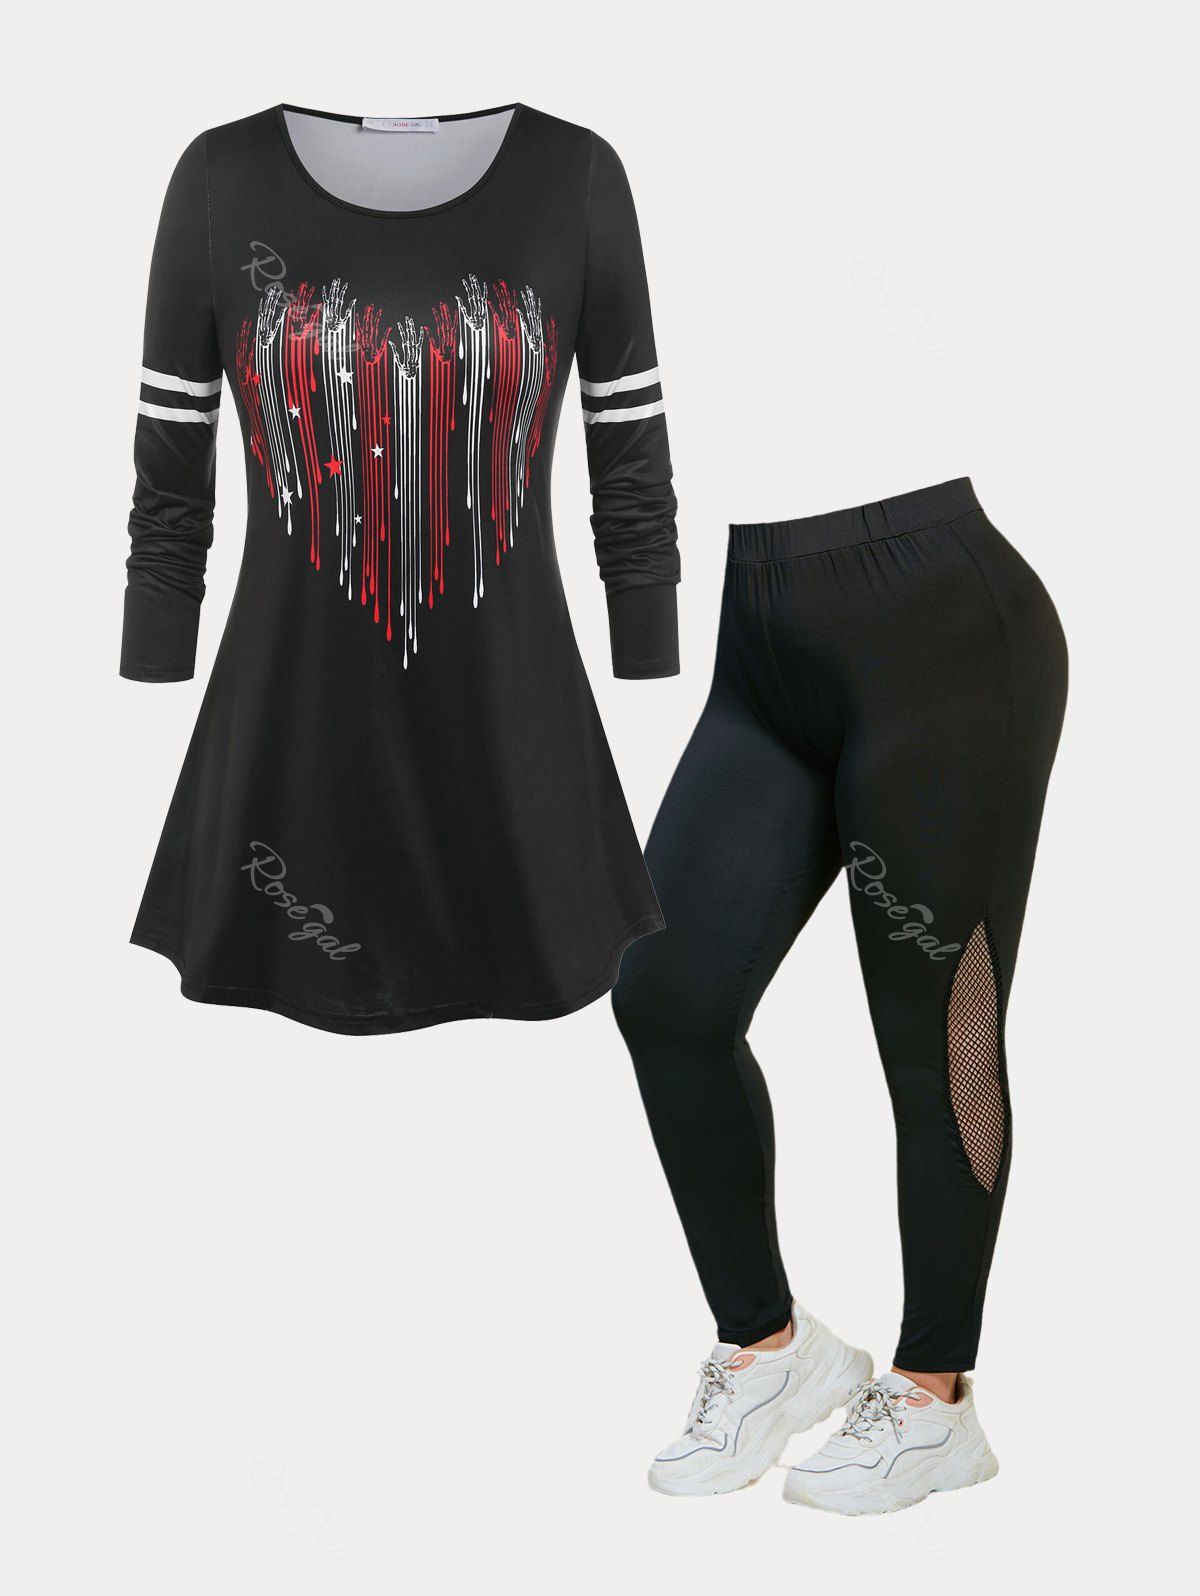 Discount Plus Size Heart Striped Print T Shirt and Net Panel Leggings Outfit  